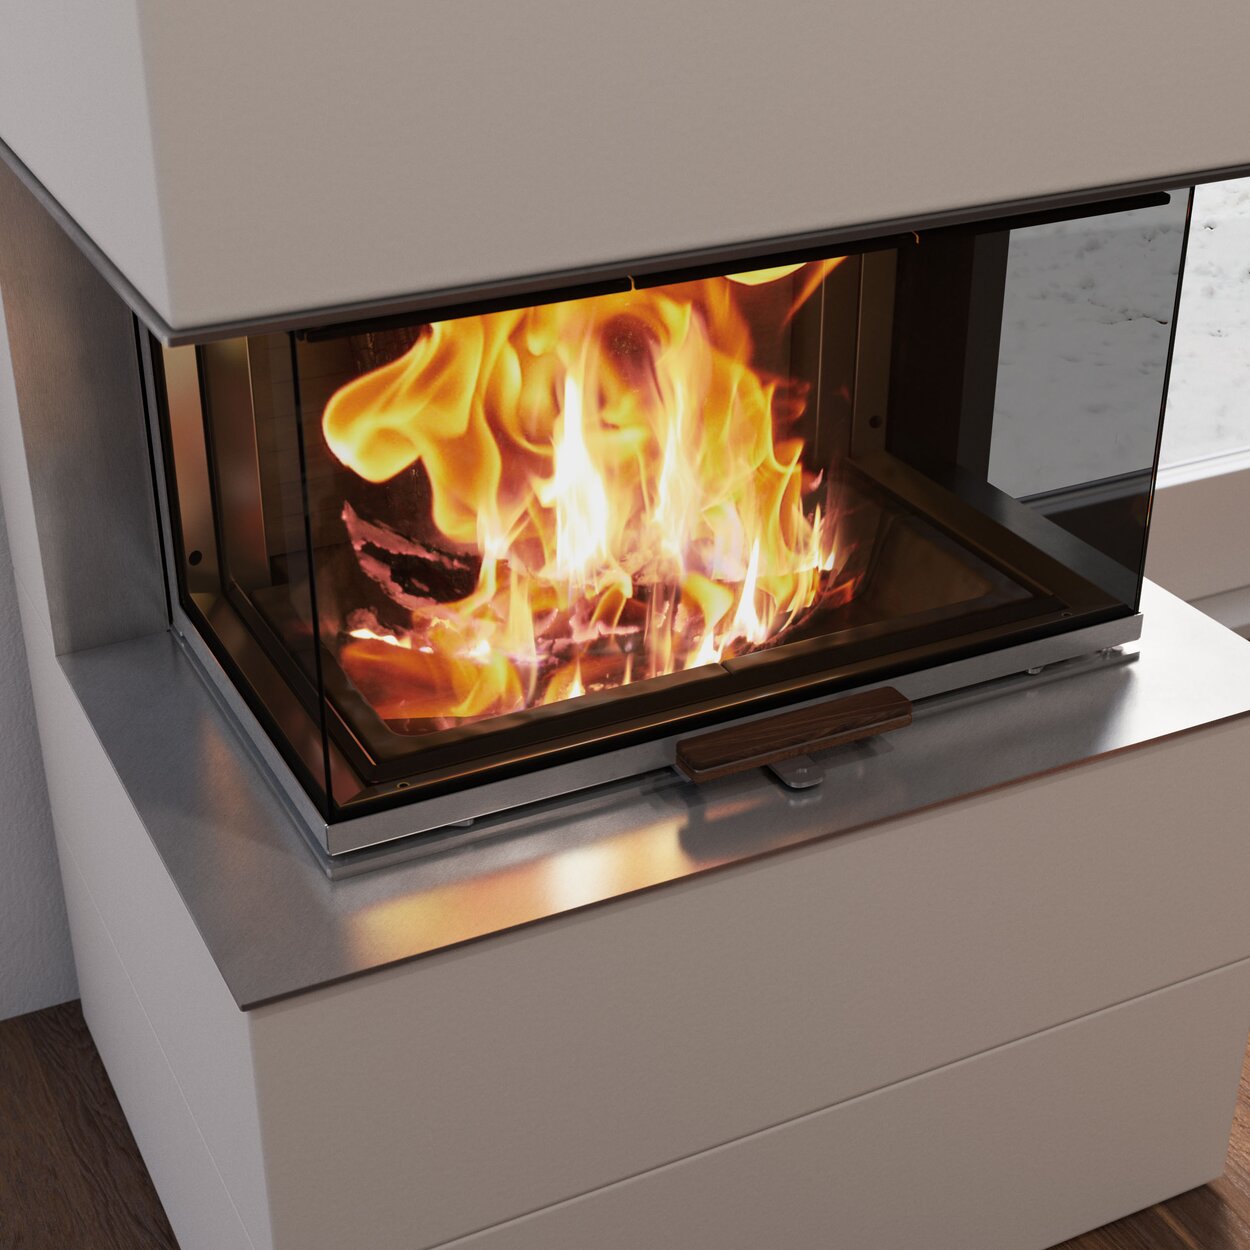 Wood fireplace VISIO 3 ELEMENT with stainless steel window & support frame and high flame in the firebox